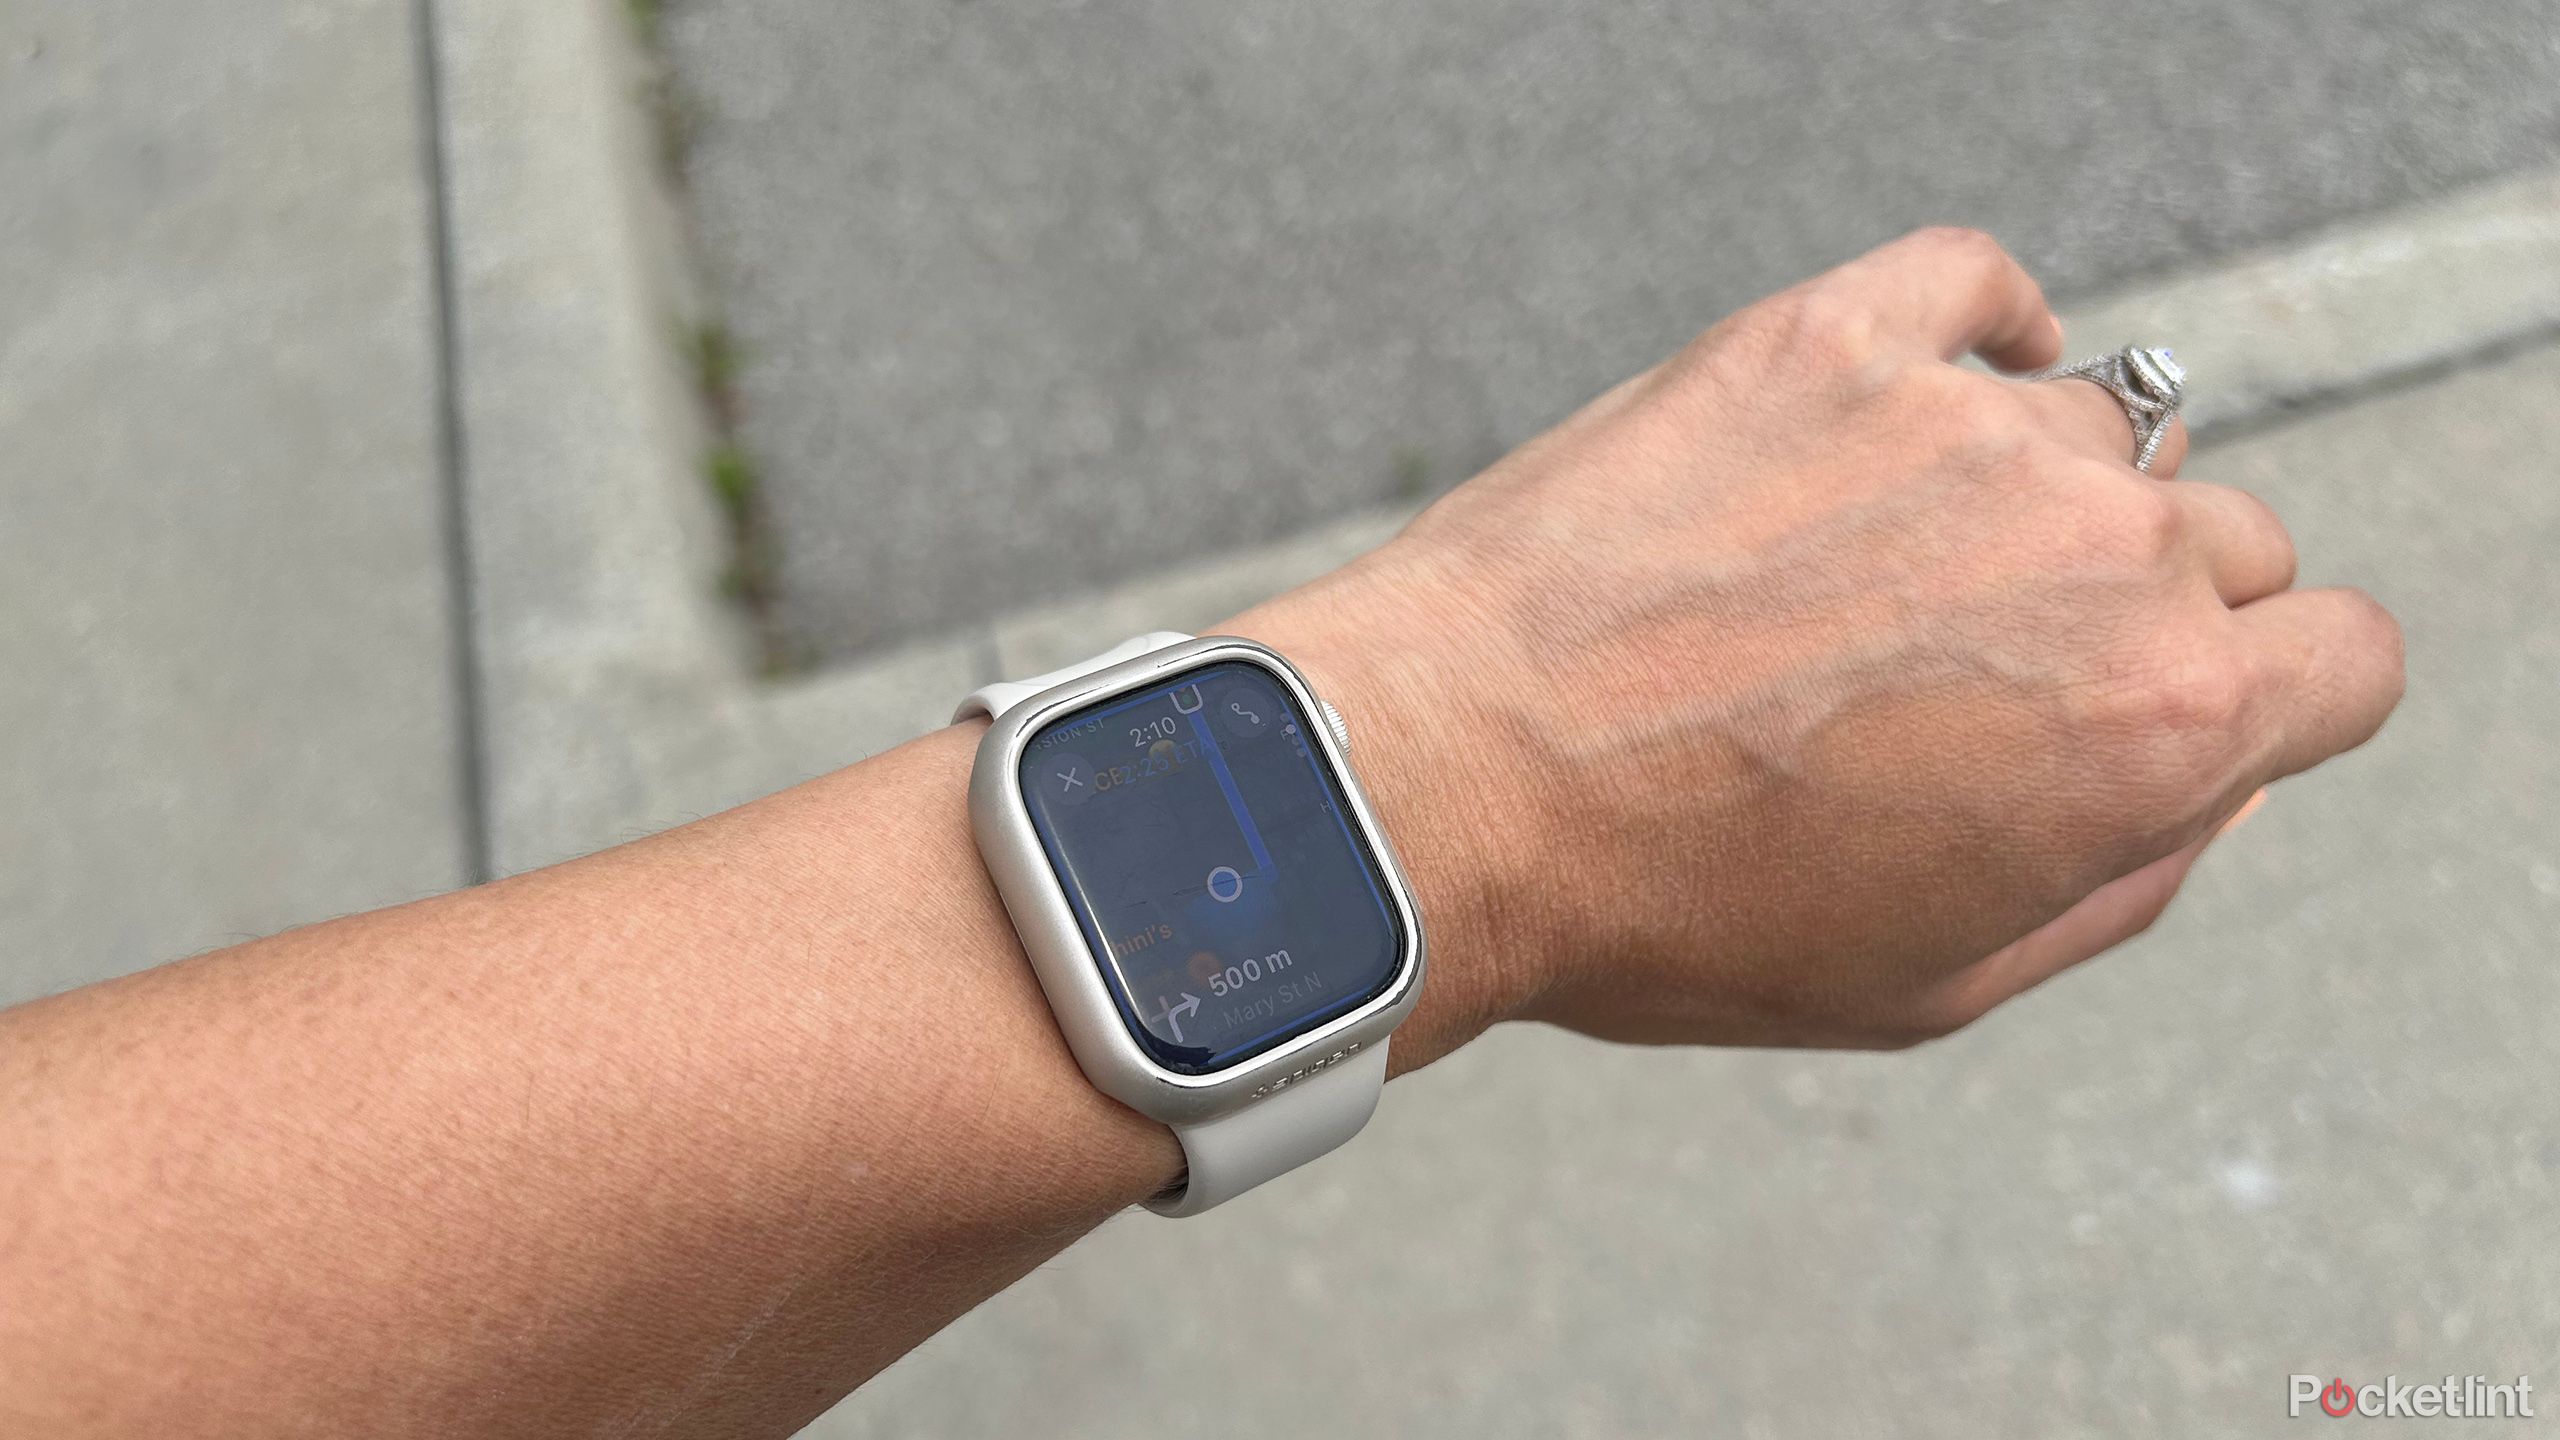 An Apple Watch on a wrist outside showing turn by turn navigation directions from Apple Maps